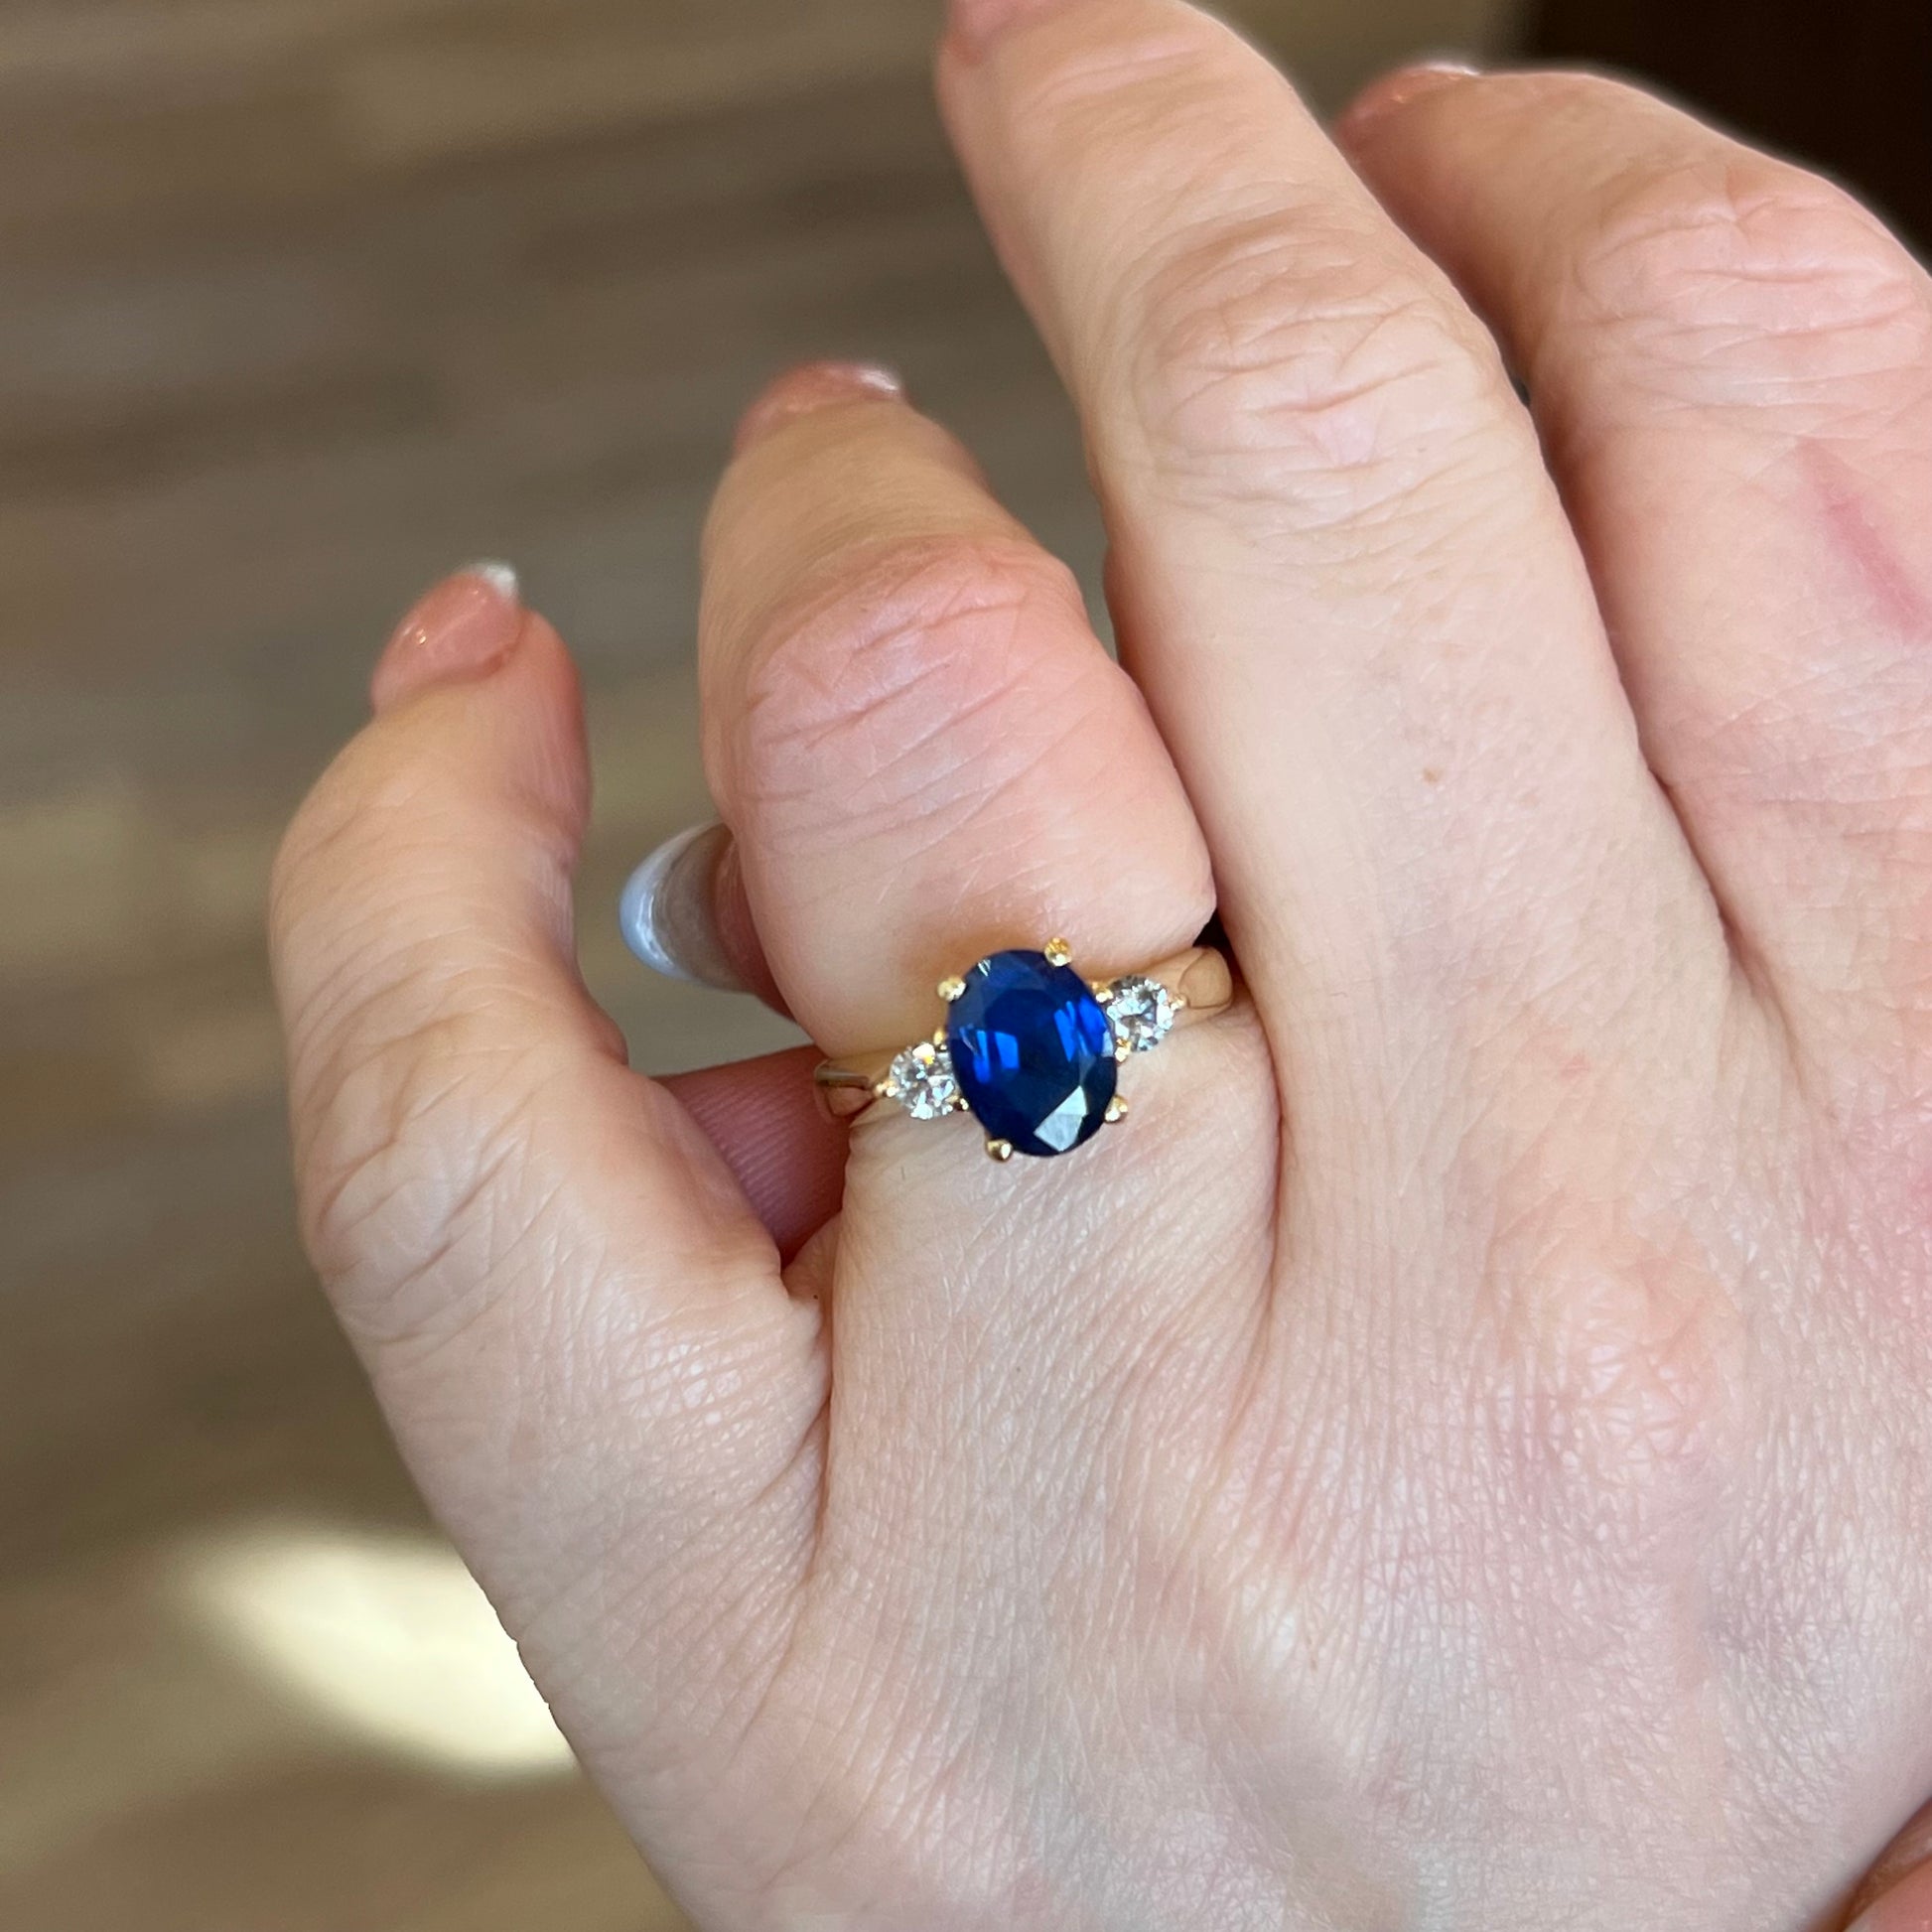 1.70 Oval Cut Sapphire Engagement Ring in 18k Yellow Gold